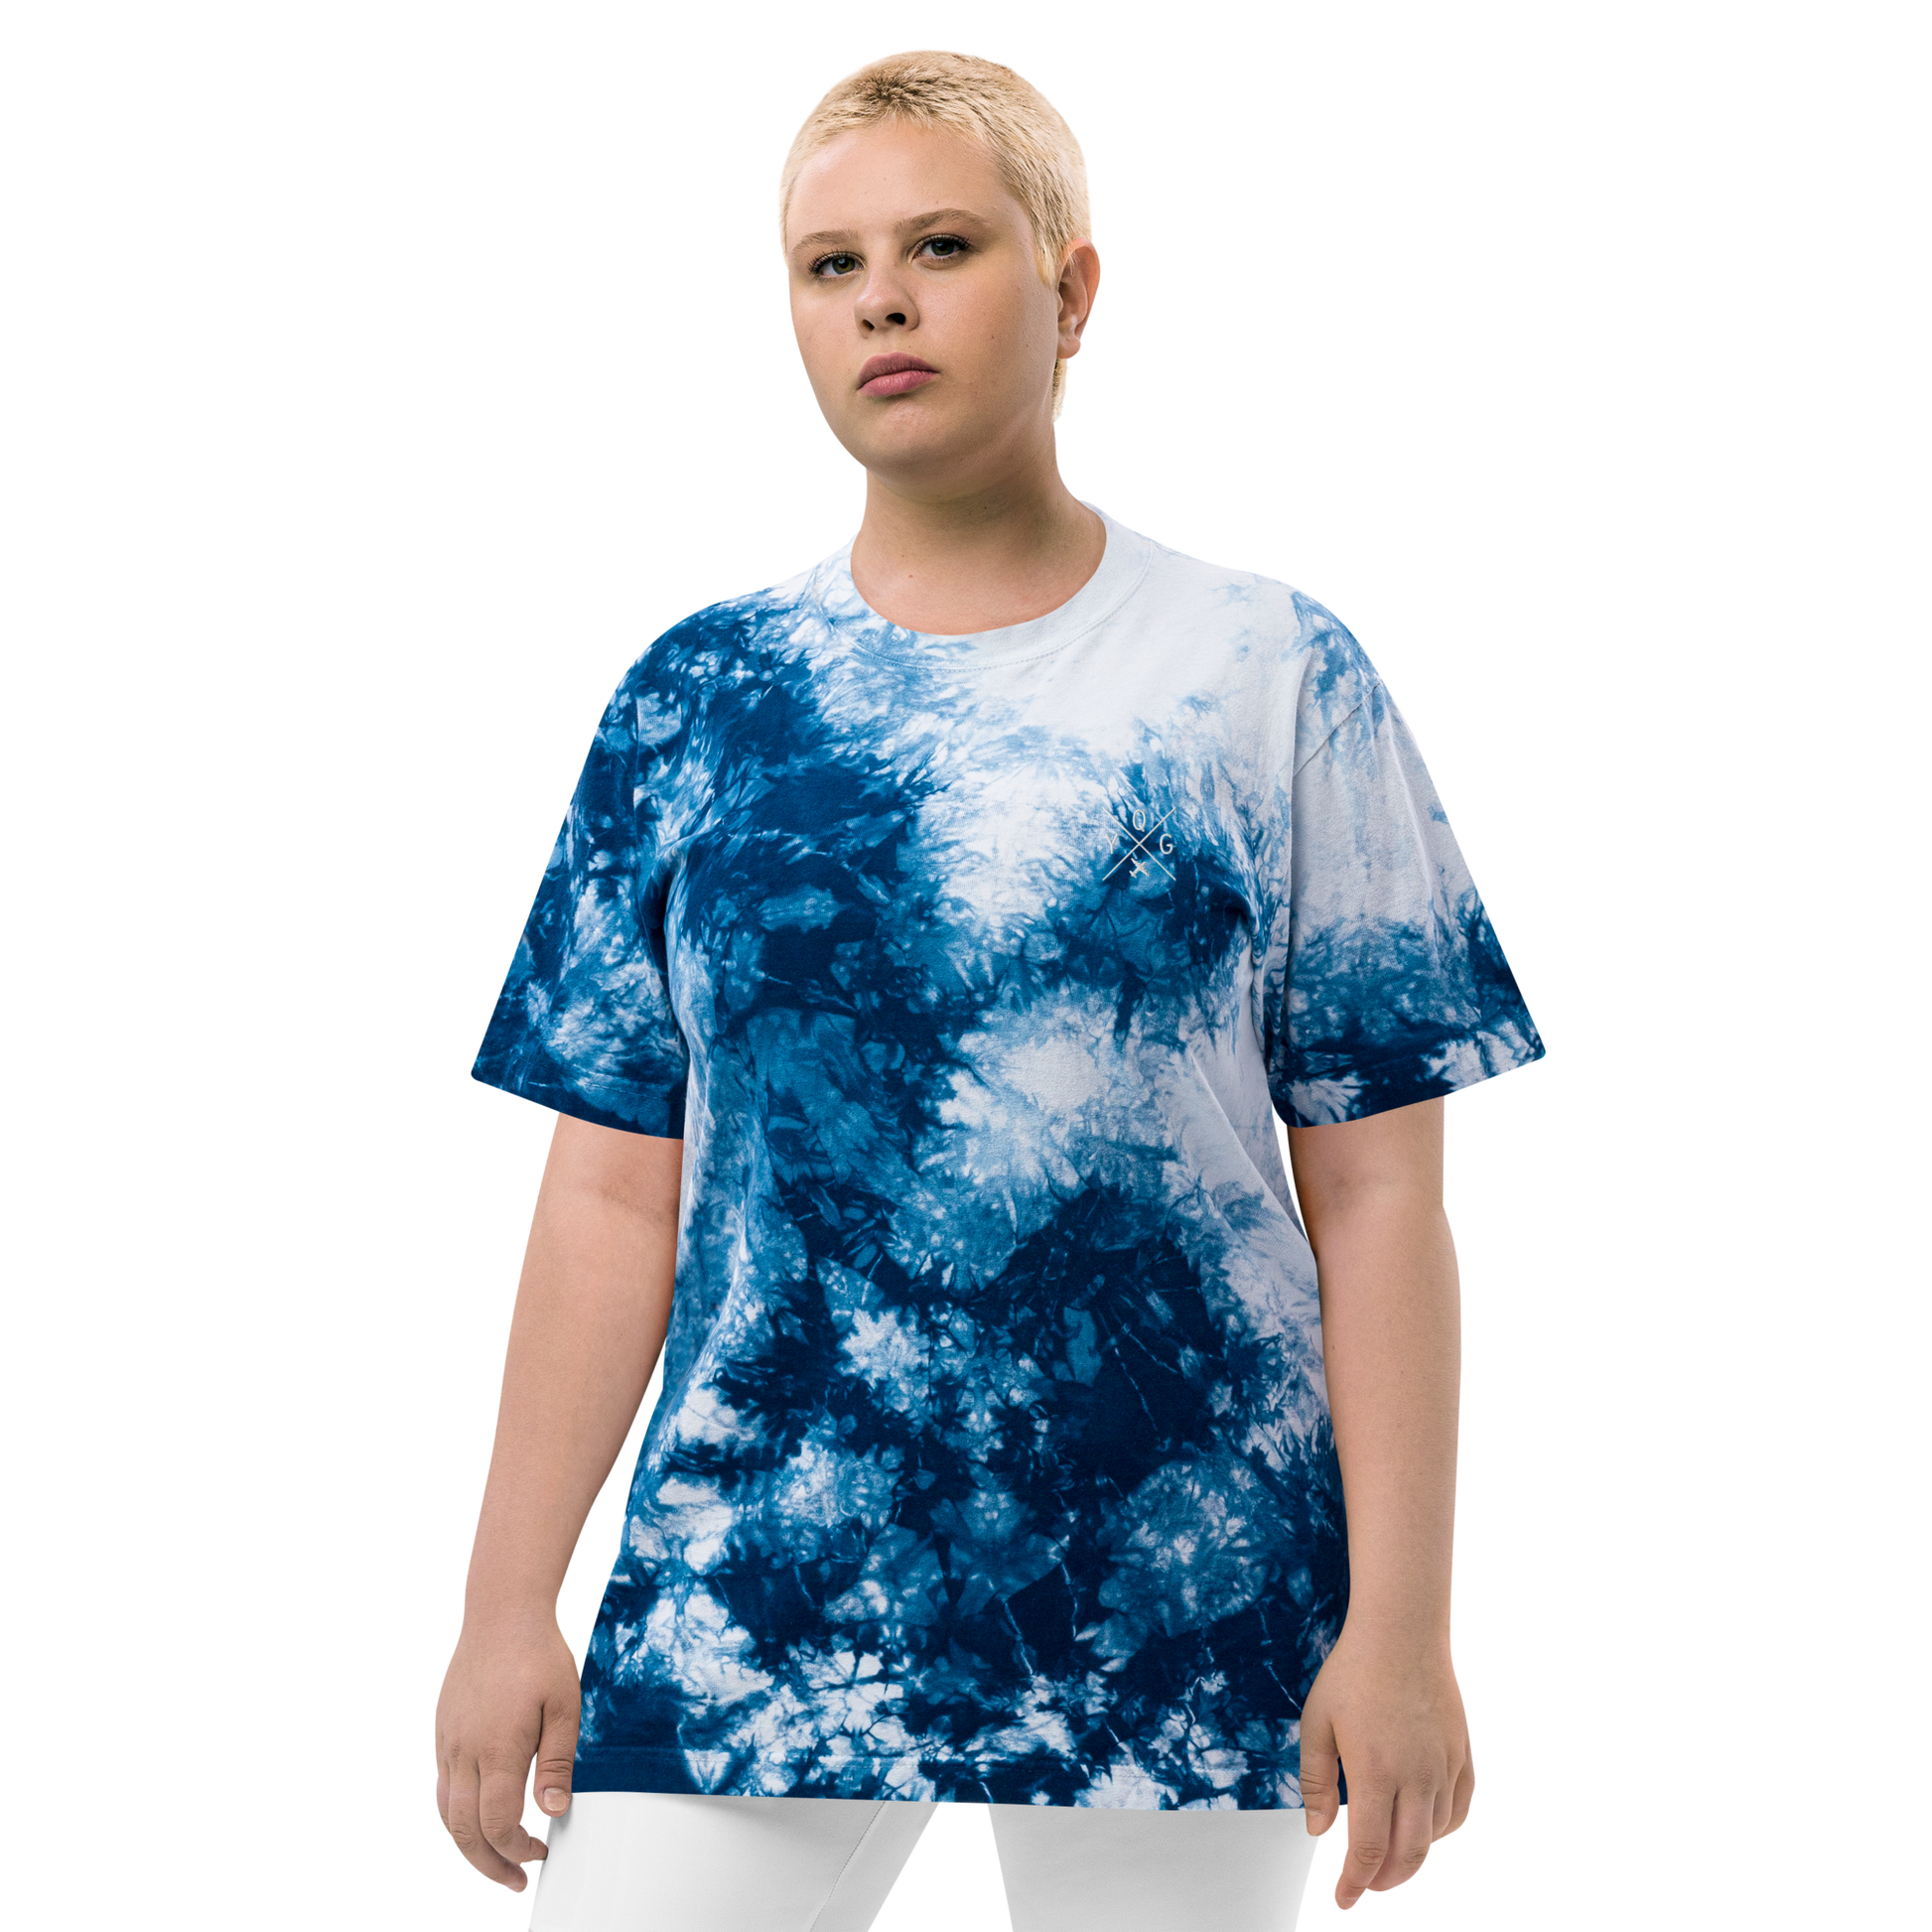 YHM Designs - YQG Windsor Oversized Tie-Dye T-Shirt - Crossed-X Design with Airport Code and Vintage Propliner - White Embroidery - Image 08